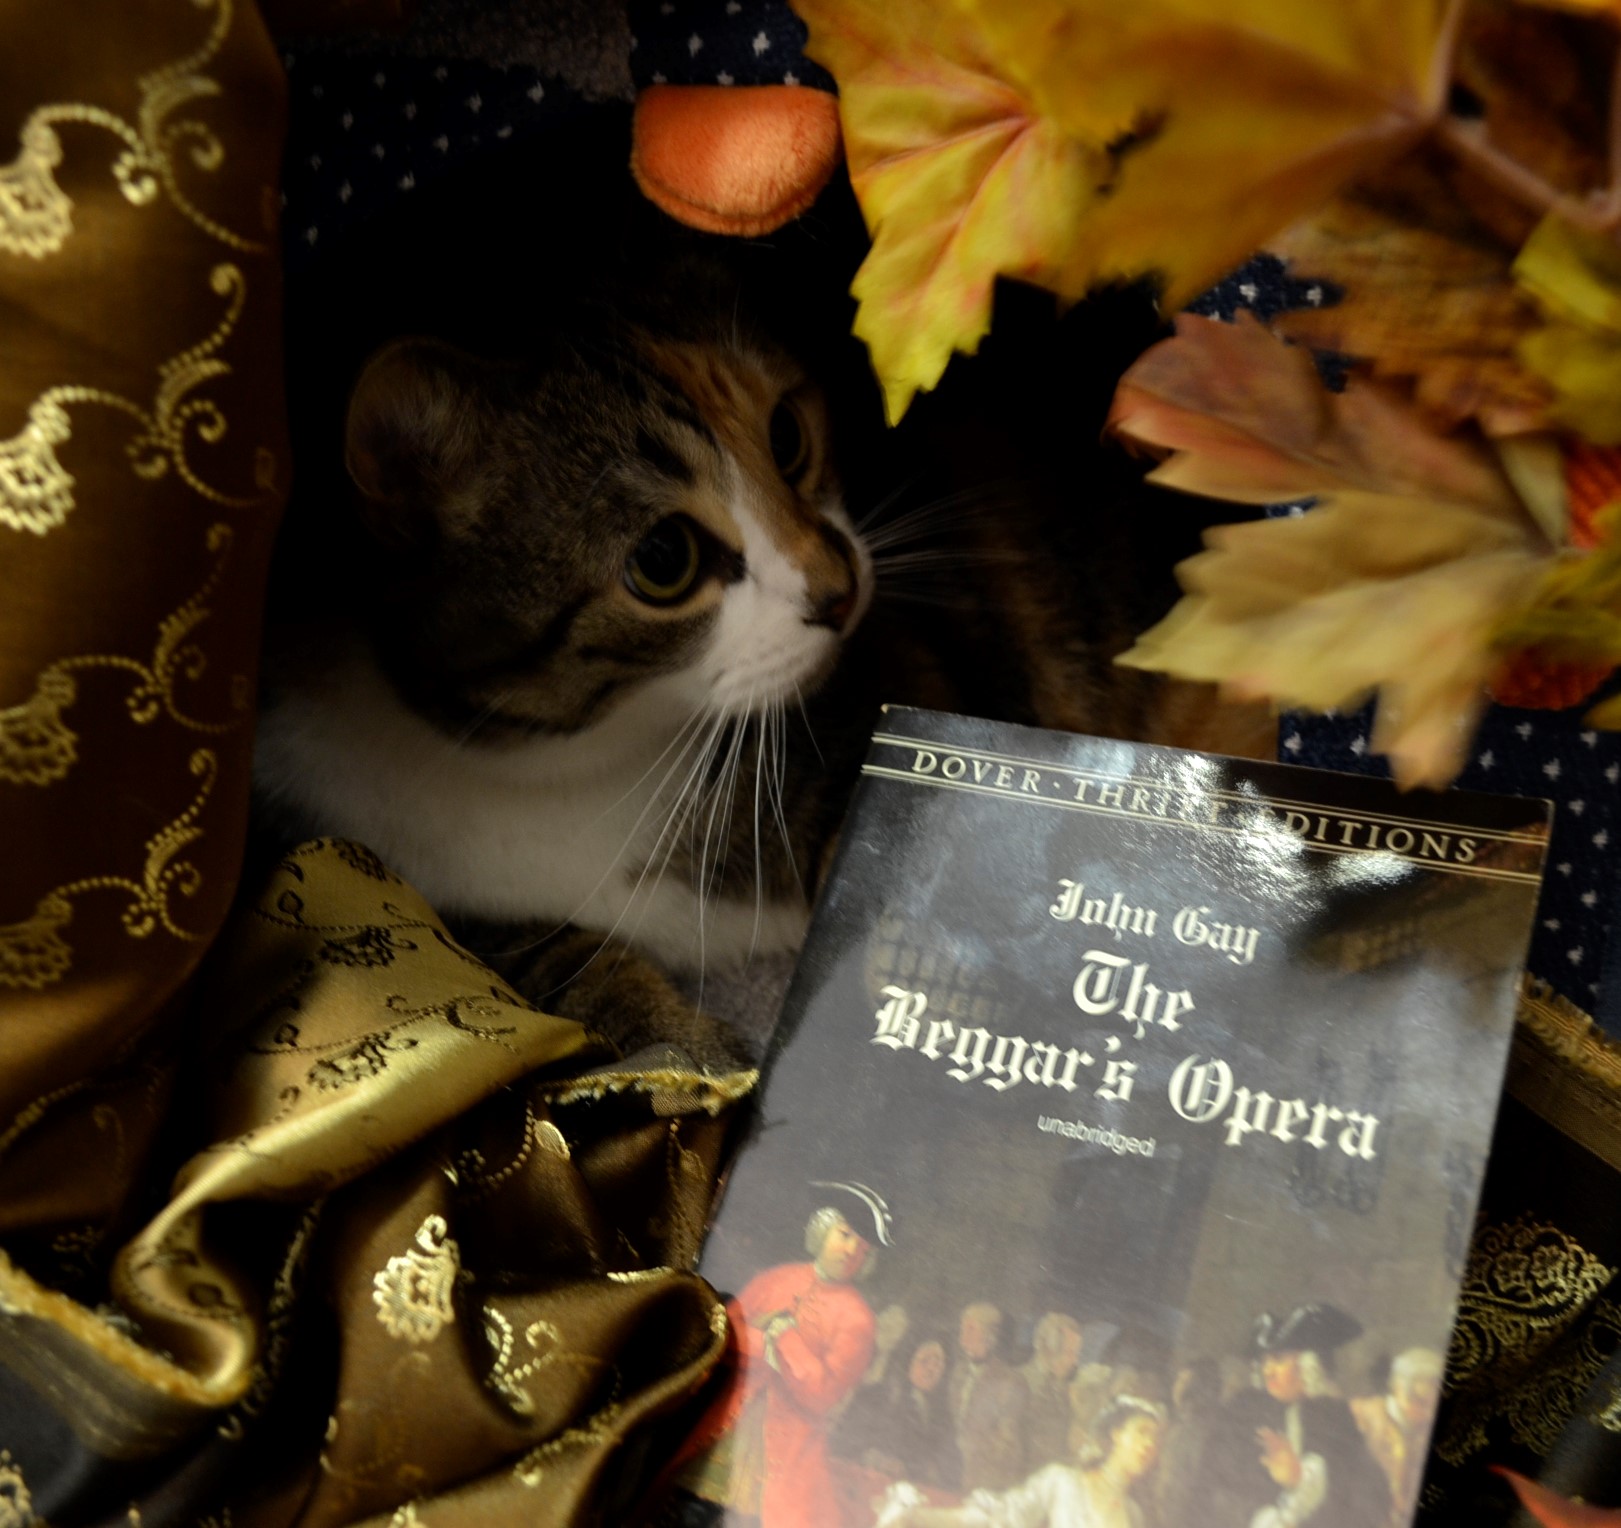 A calico tabby hides in a golden tent beside the Beggar's Opera.